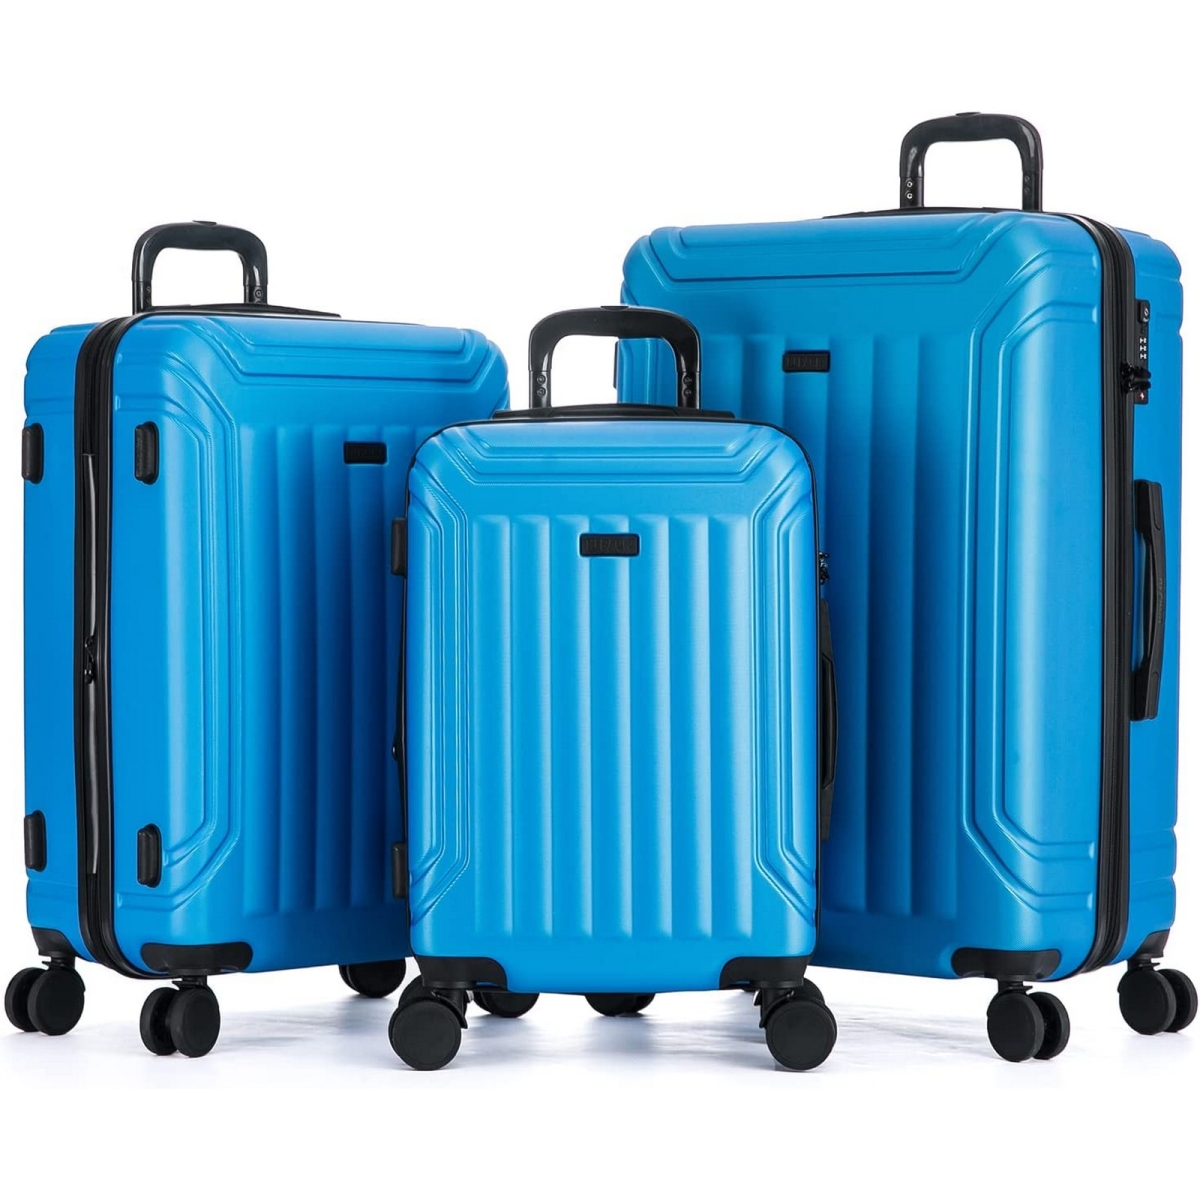 Picture of Hipack 25HP2107-BLUE Hipack Rover   Generation Hardside 3-Piece Luggage Set - Blue